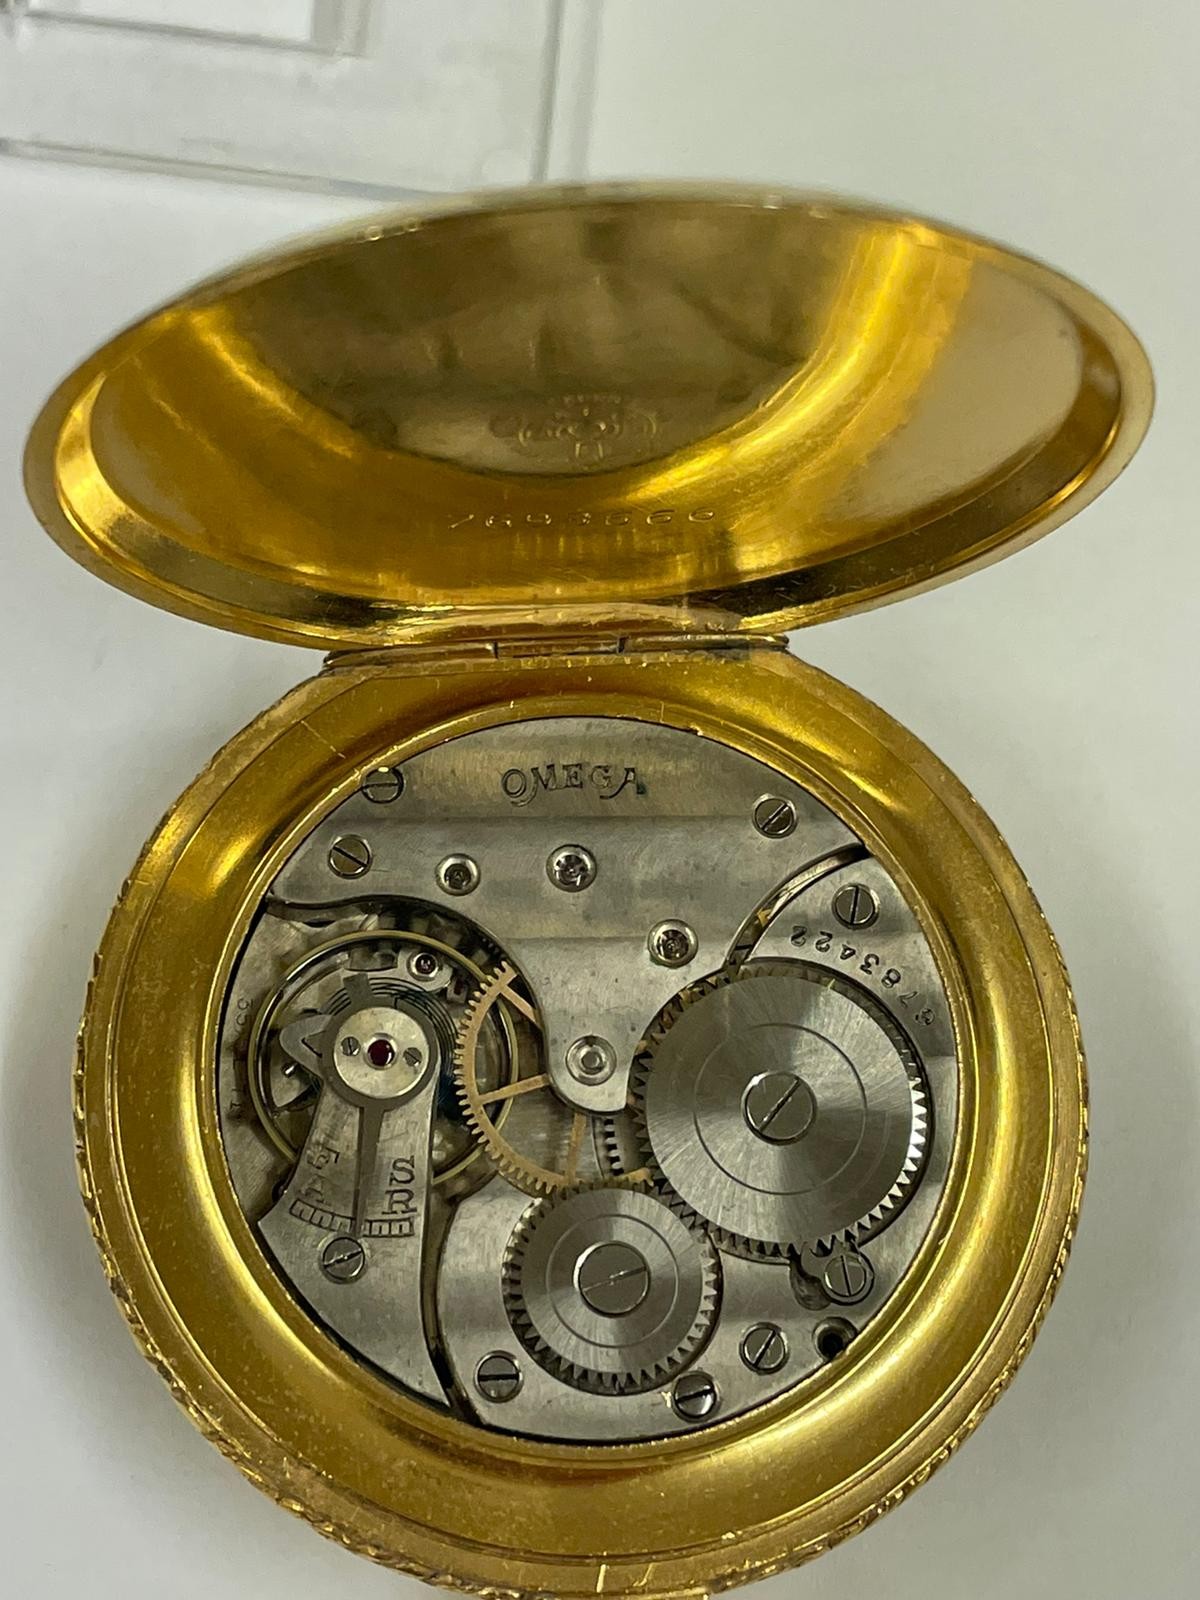 Vintage yellow metal Turkish ottoman omega pocket watch, working but sold with no guarantees - Image 5 of 10